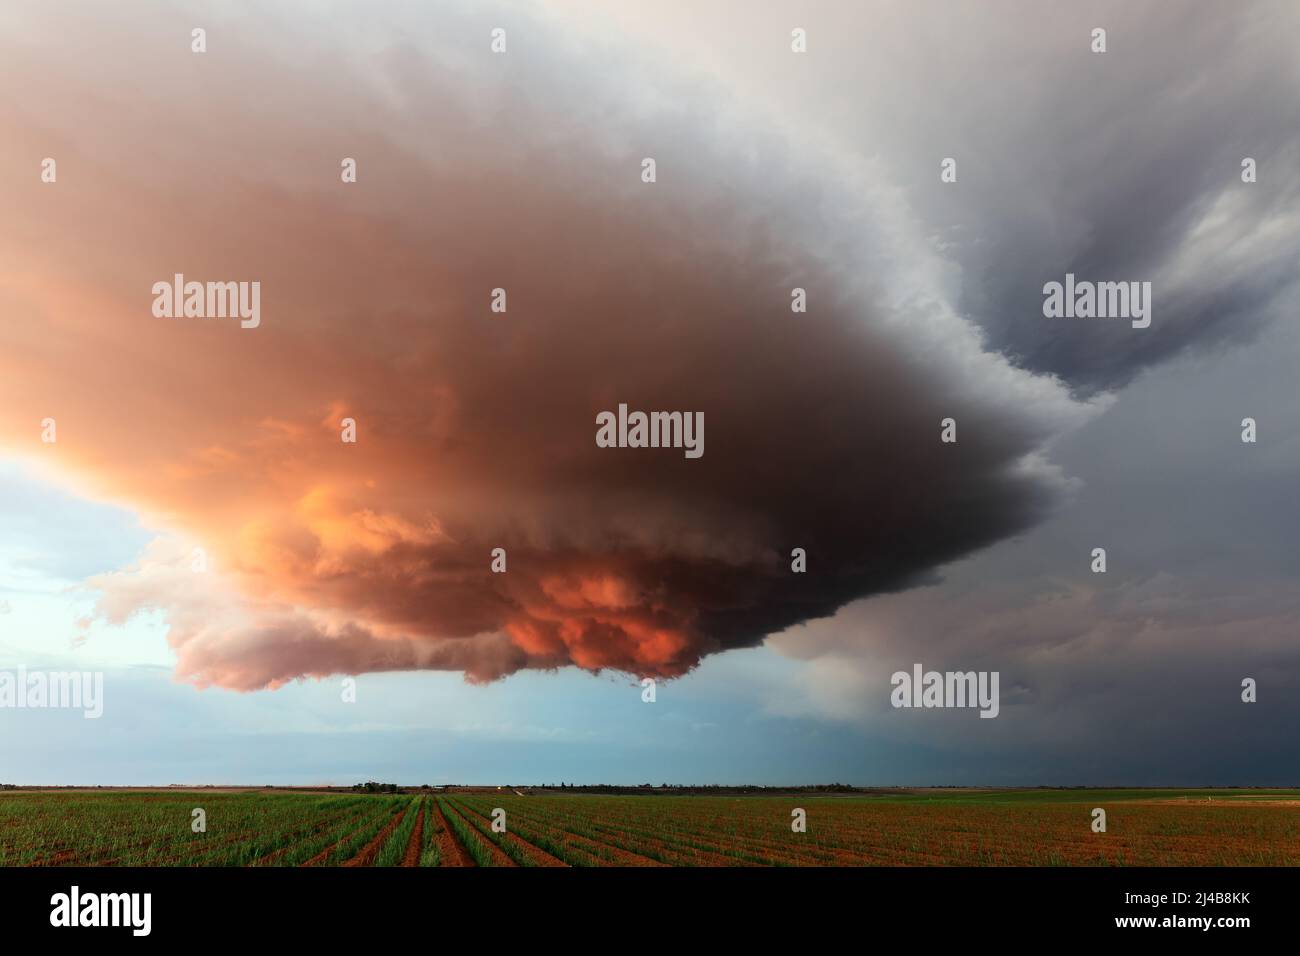 Dramatic supercell storm clouds at sunset near Earth, Texas, USA Stock Photo